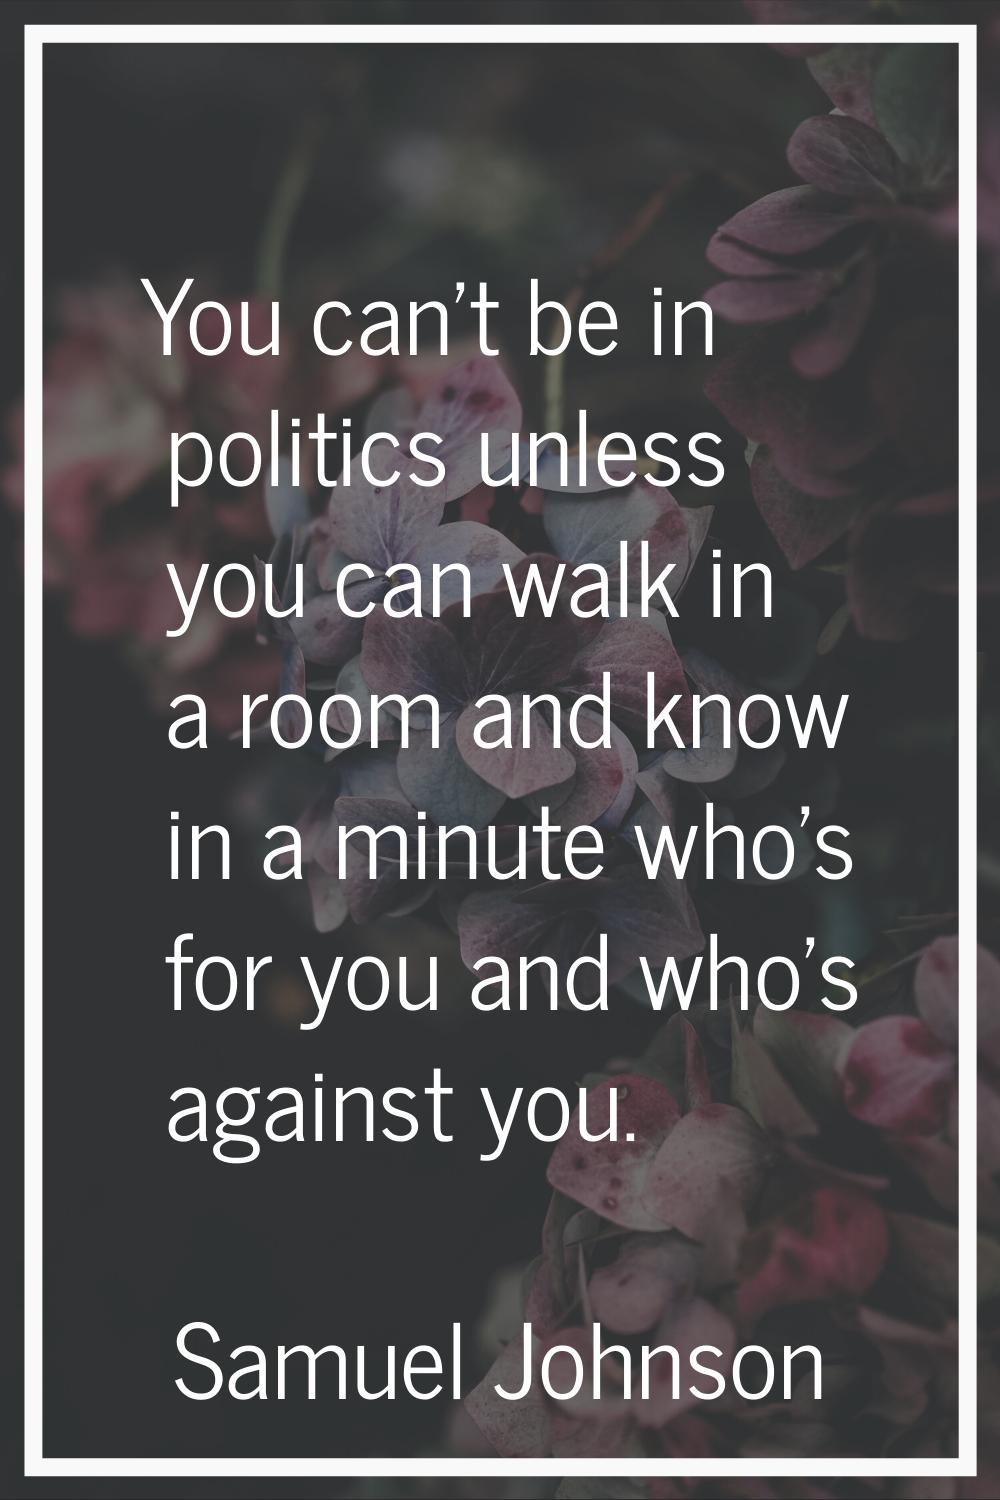 You can't be in politics unless you can walk in a room and know in a minute who's for you and who's